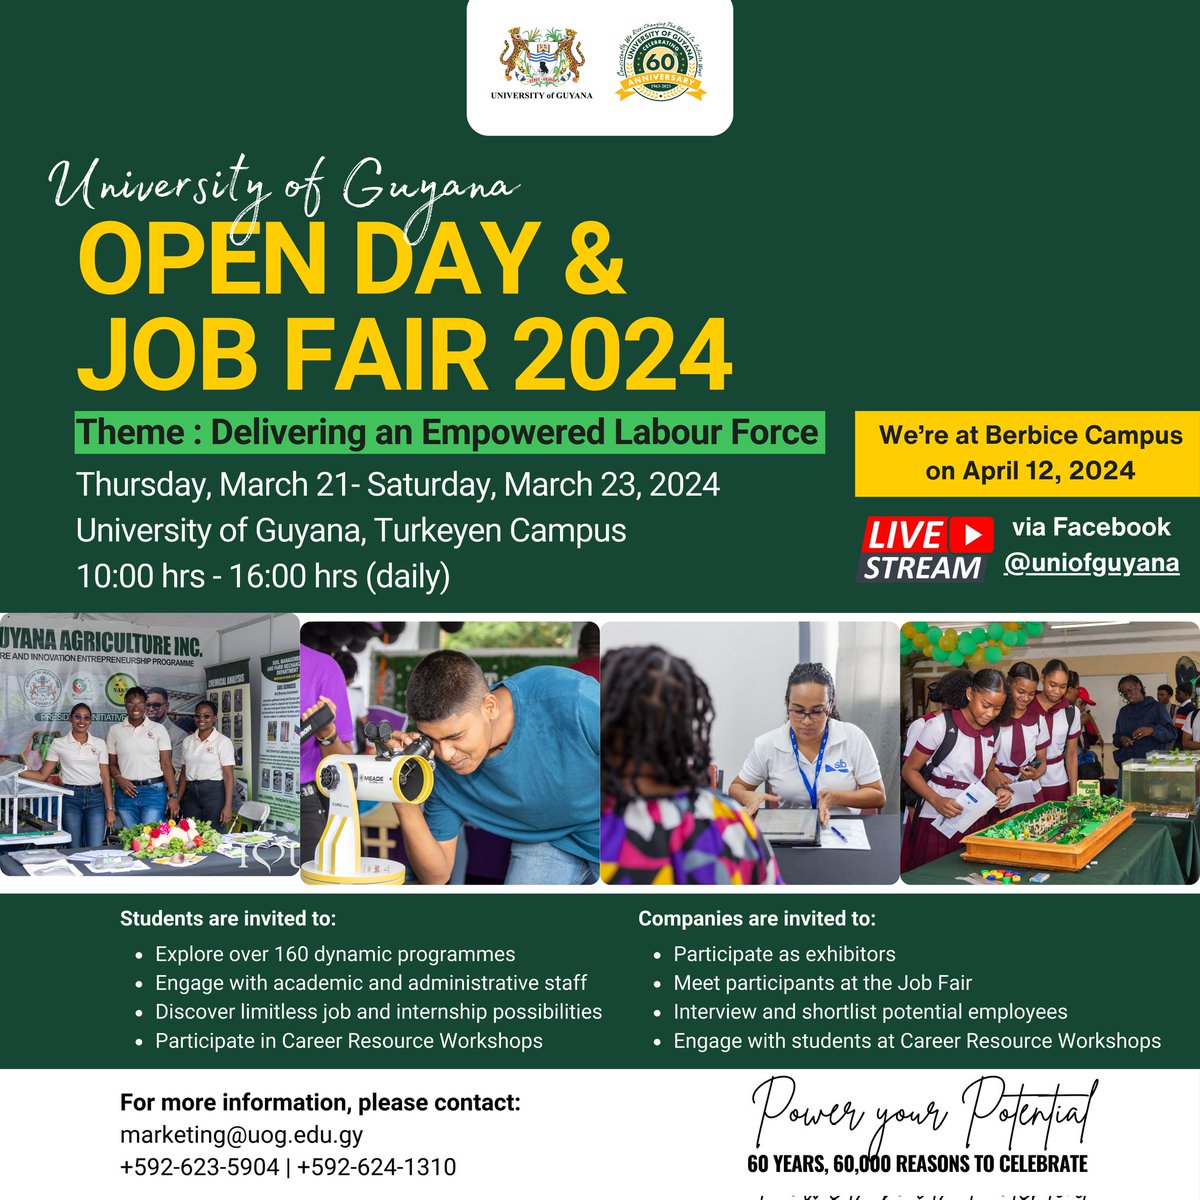 INVITATION: Visit the University of Guyana's Open Day and Job Fair 2024 being held under the theme ‘Delivering an Empowered Labour Force’ at Turkeyen Campus on Thursday, March 21-Saturday March 23, 2024. Please see the flyer below for more information. #UGOpenDay2024